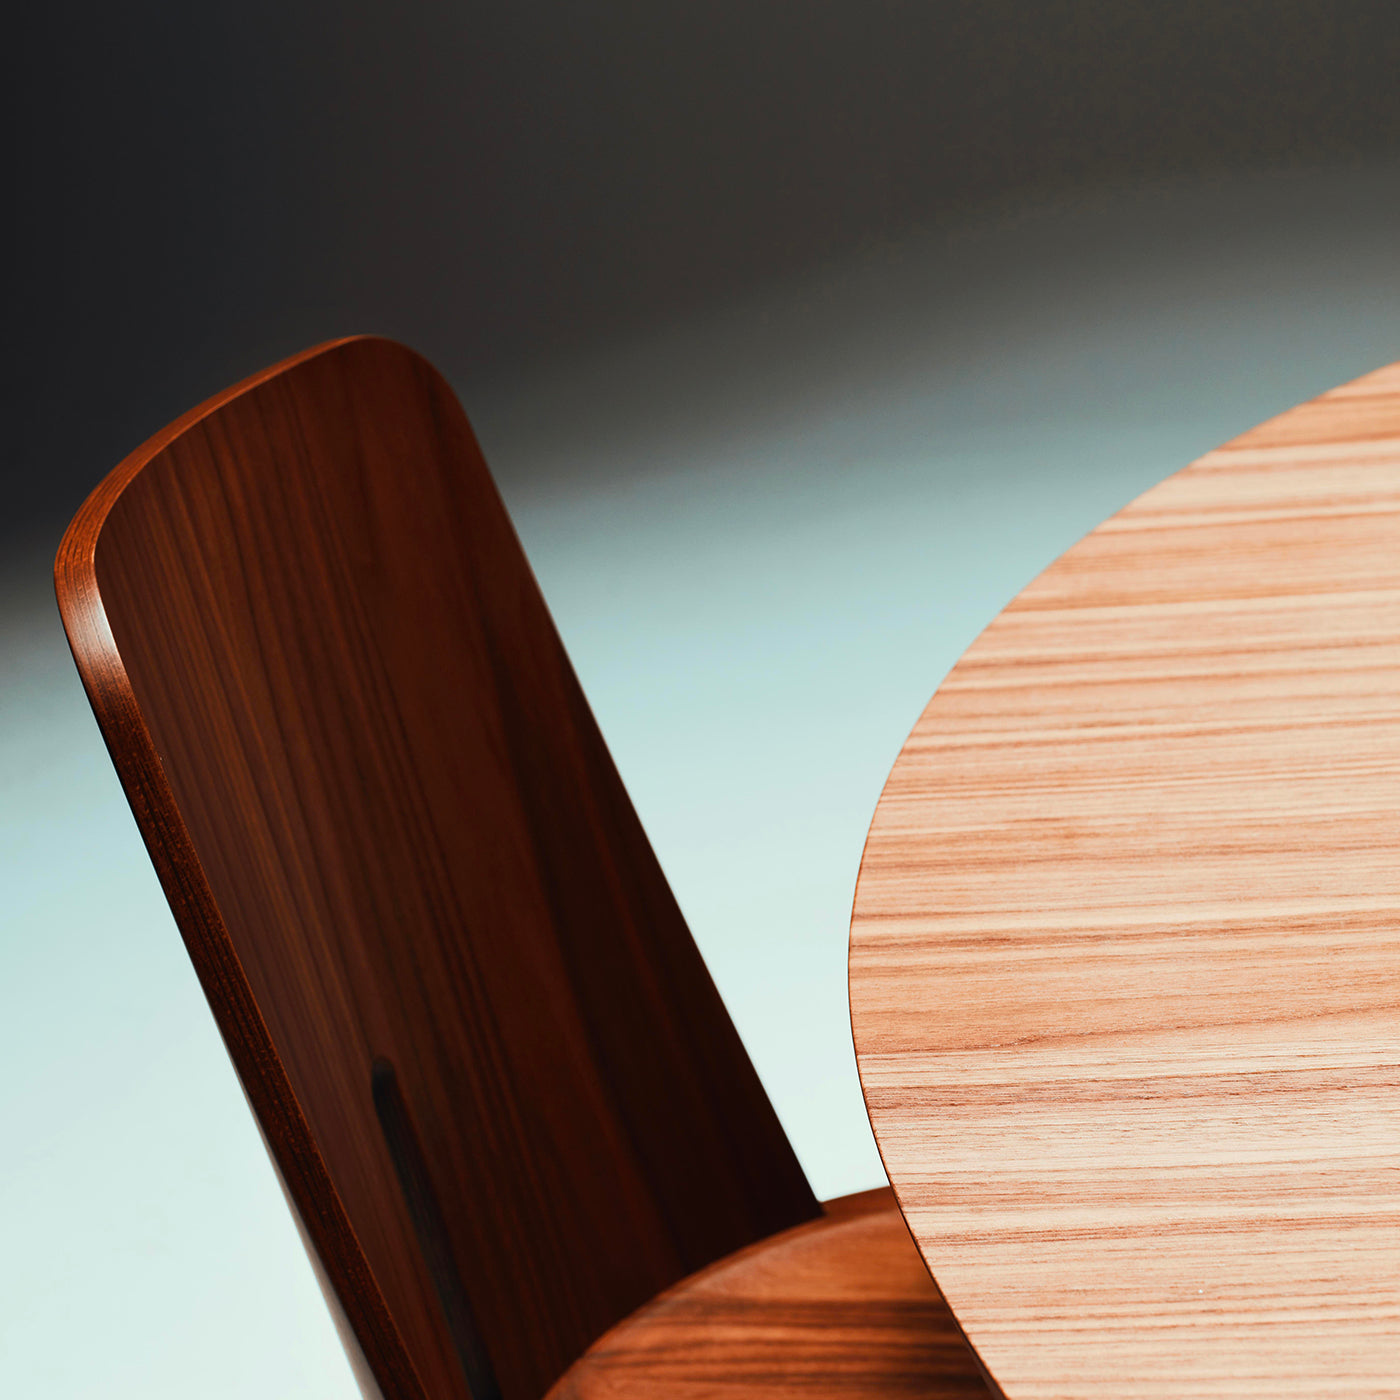 Intersection Round Dining Table by Neri&Hu - Alternative view 4